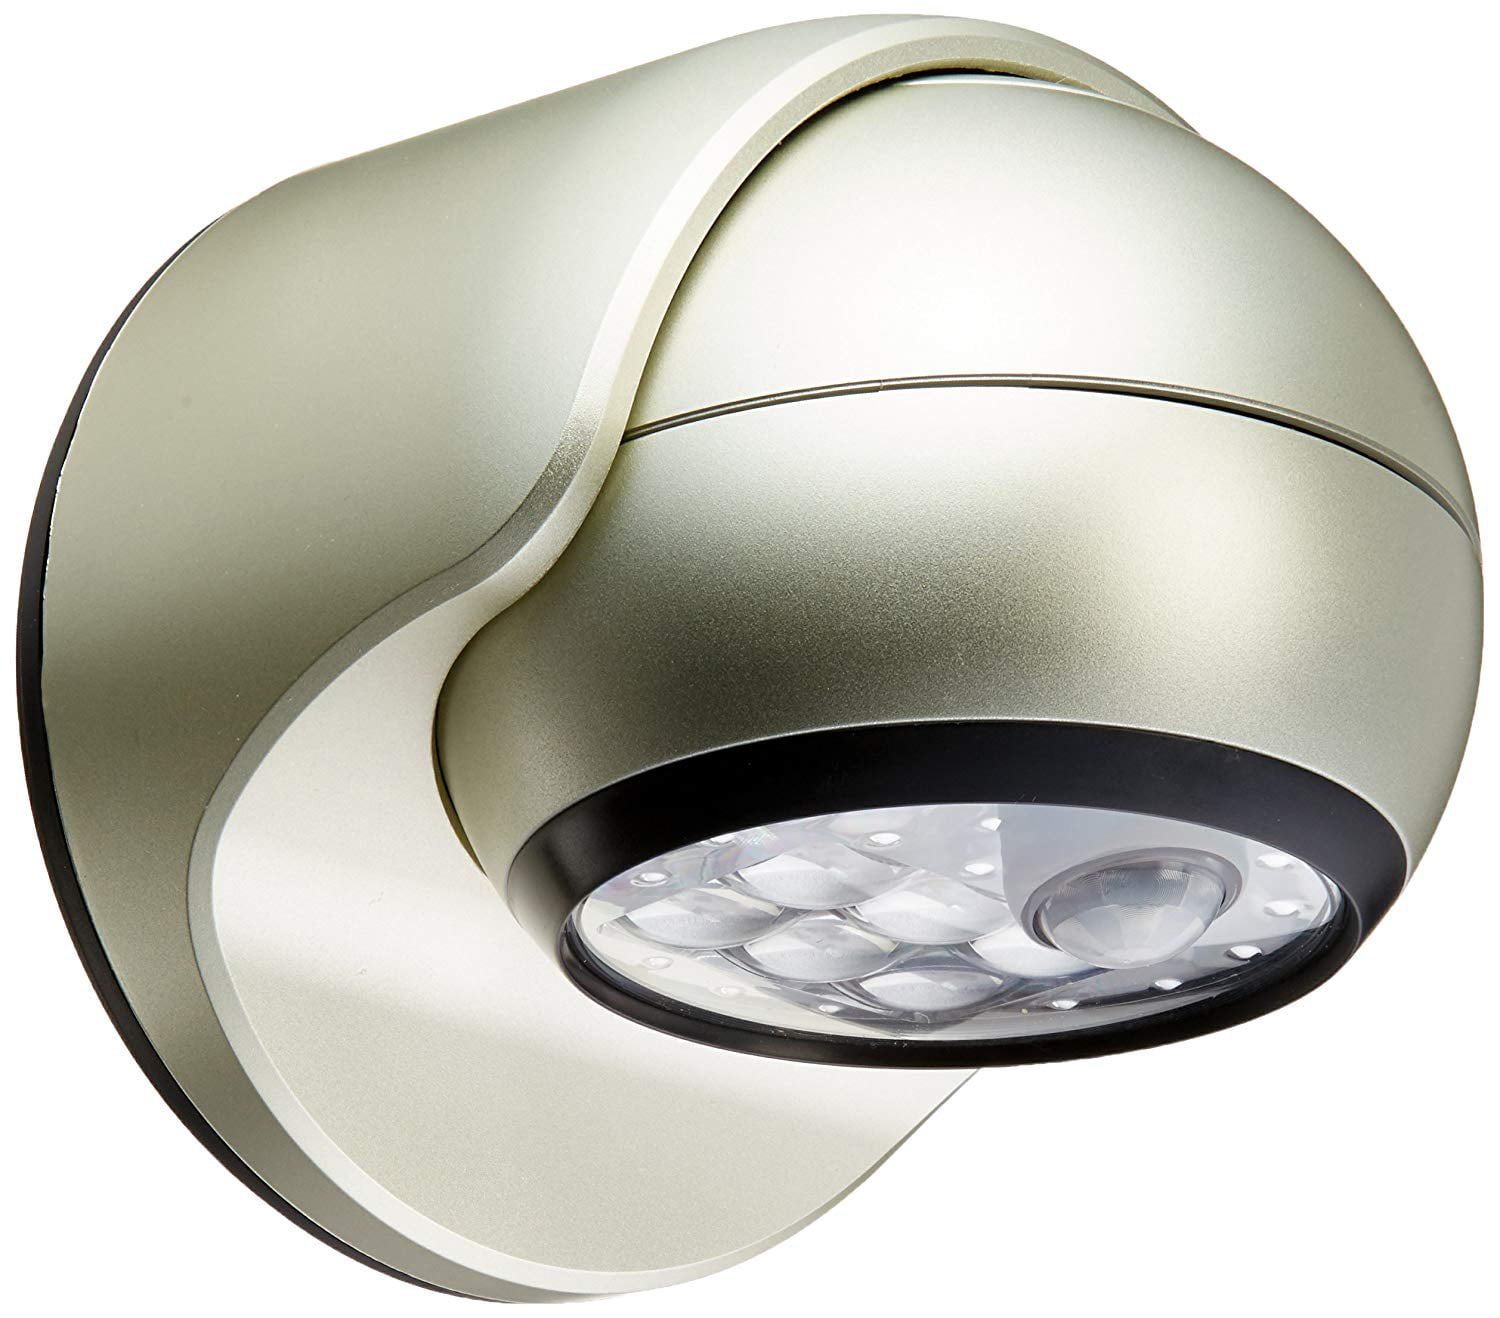 Are motion detector lights good?